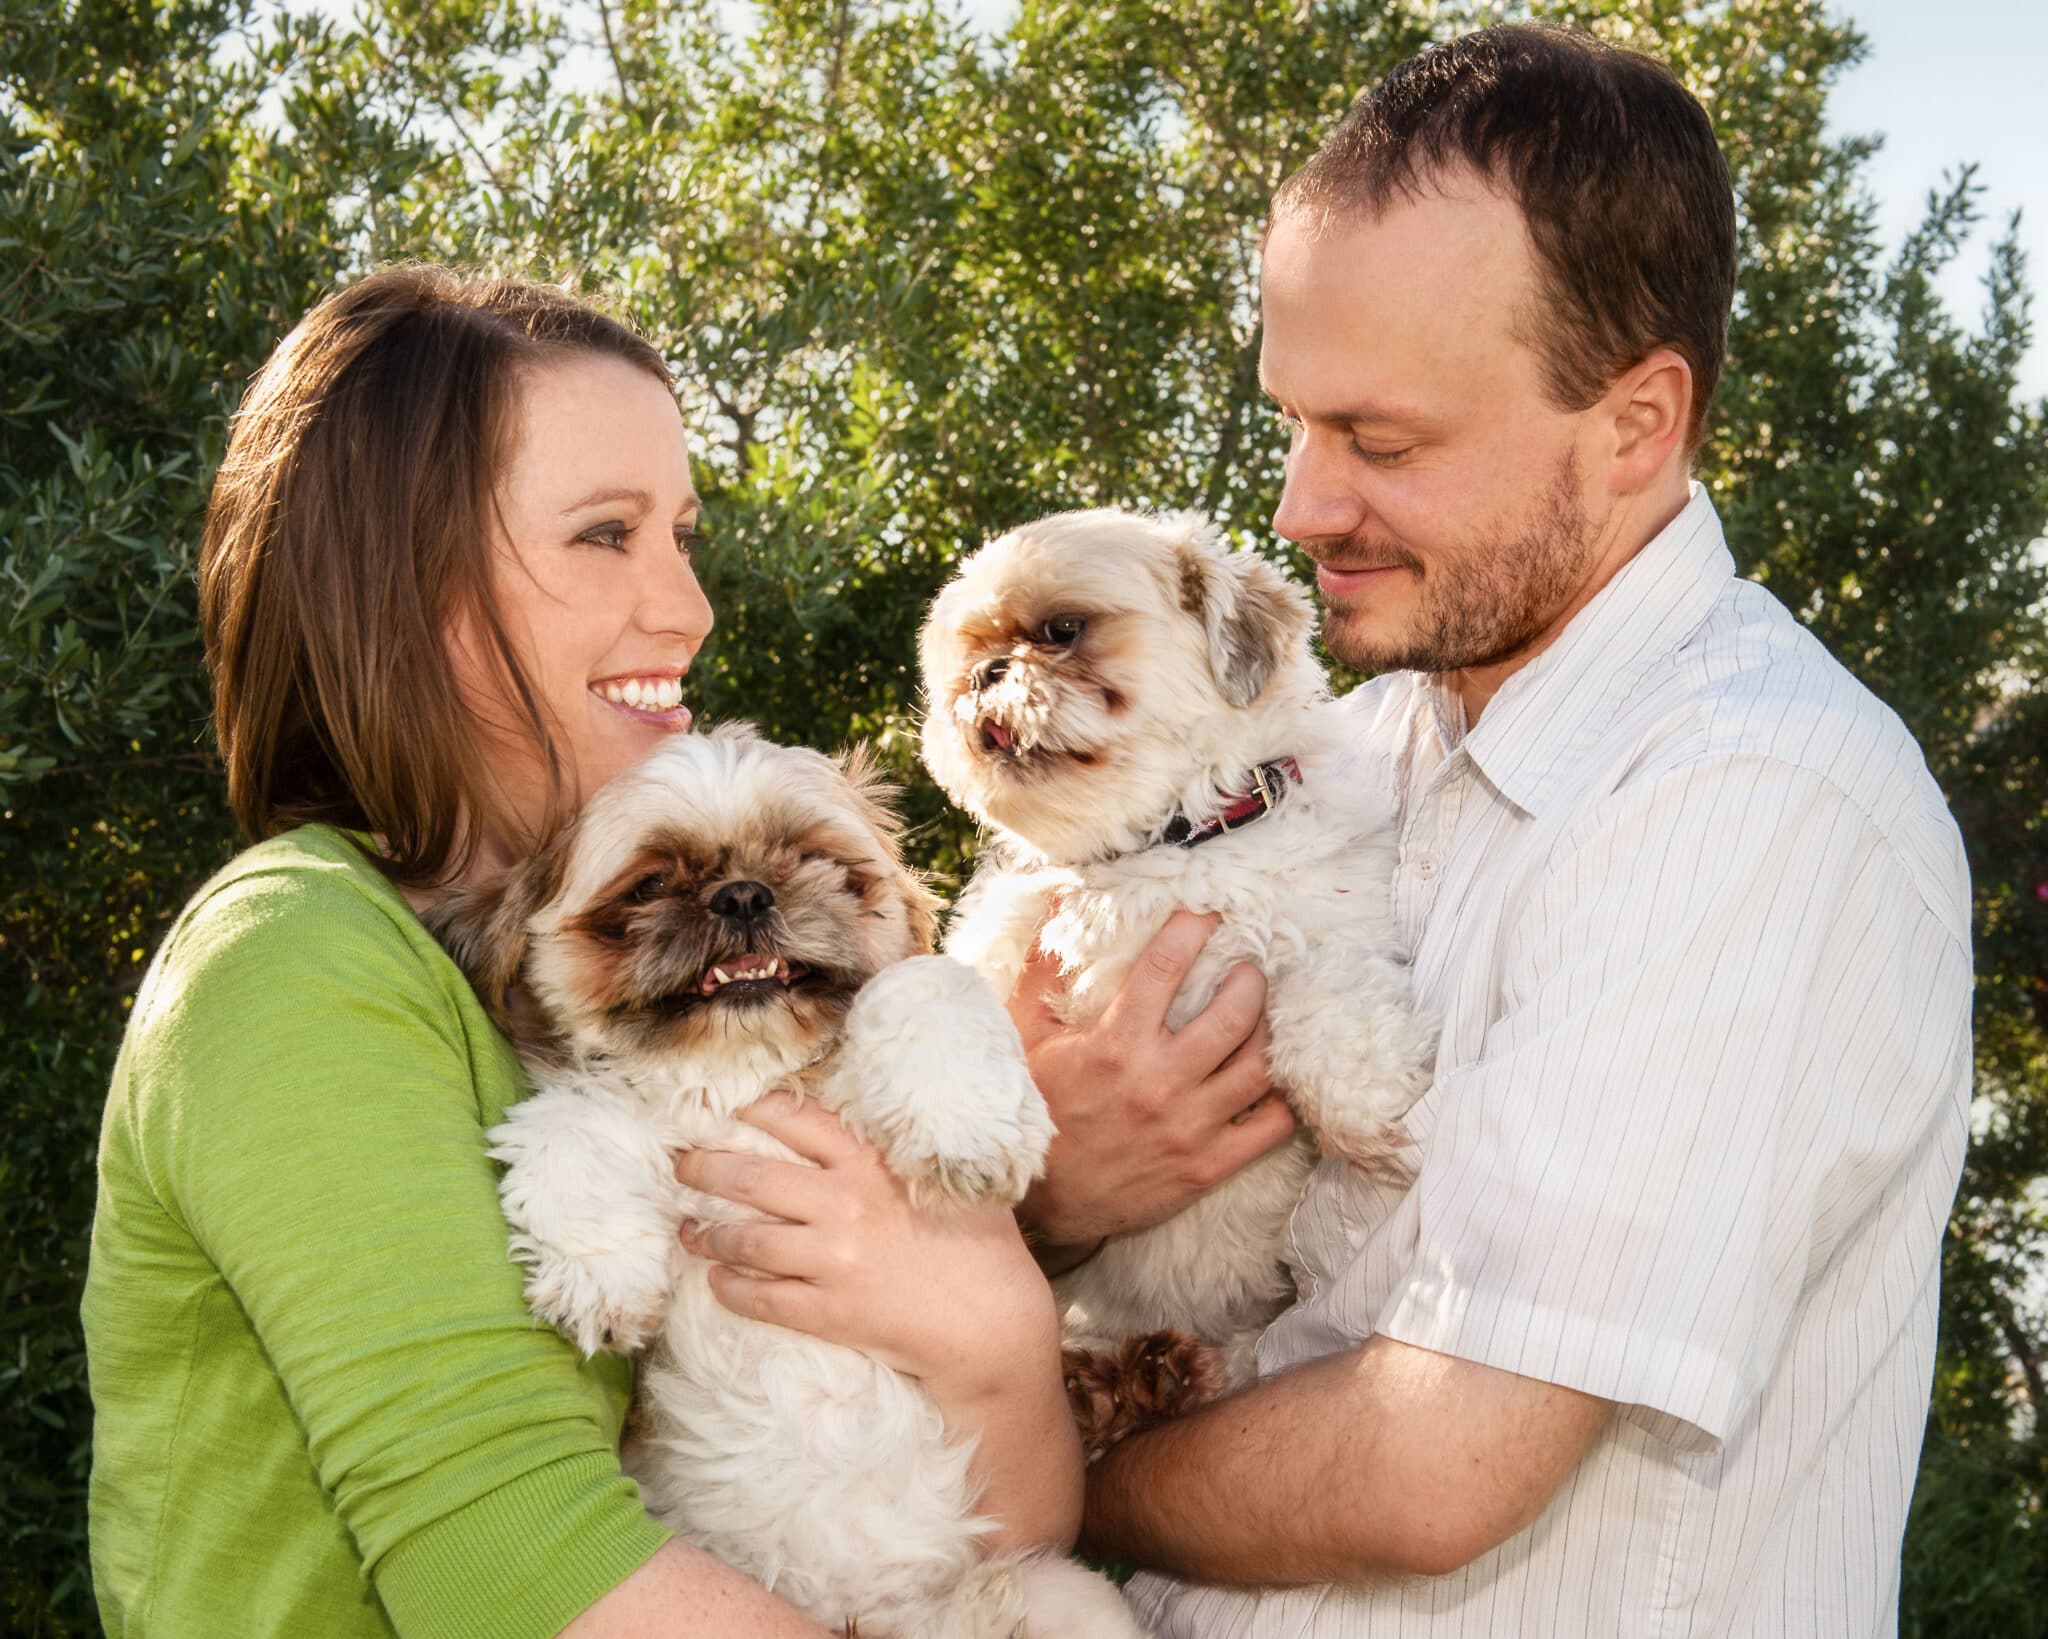 A married couple hold their fur babies during an outdoor family portrait session.